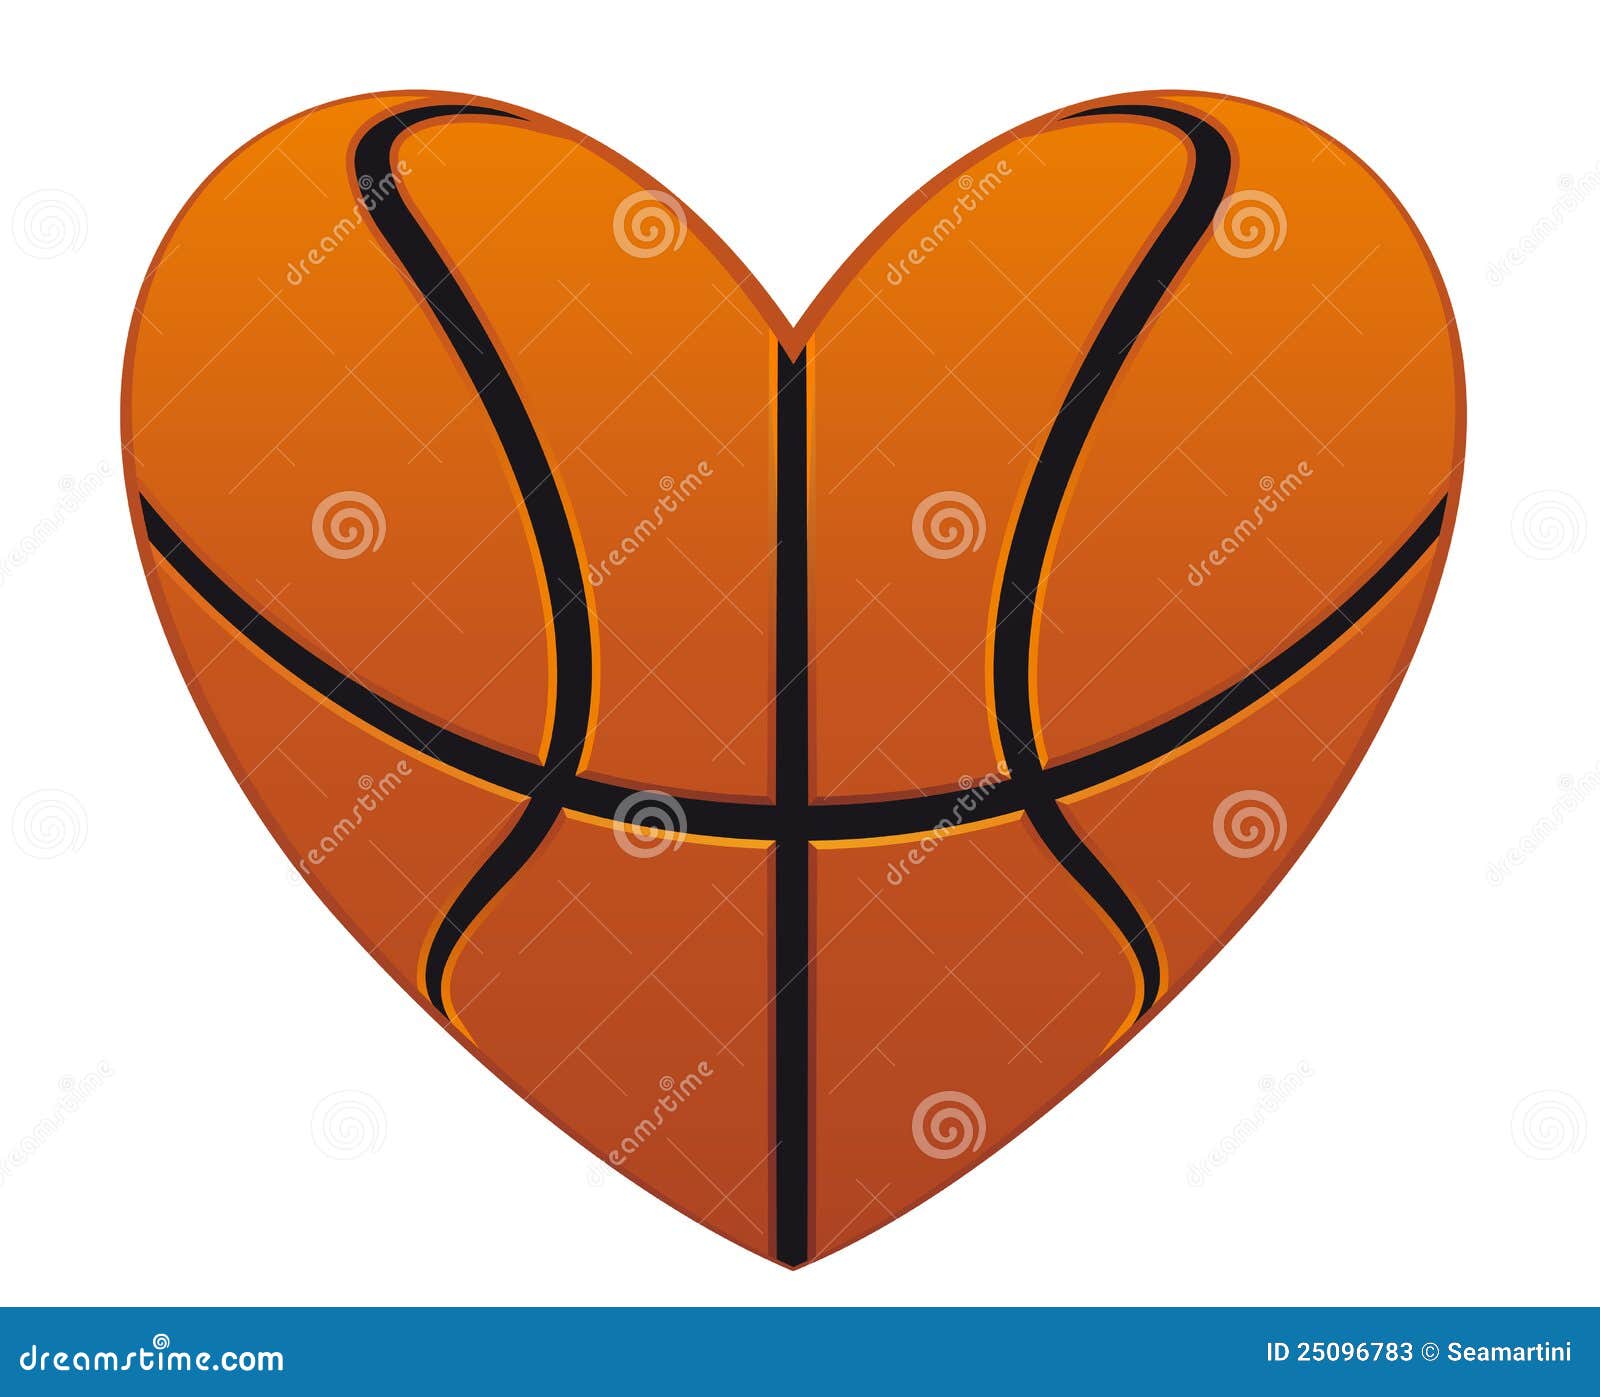 volleyball heart clipart - photo #41